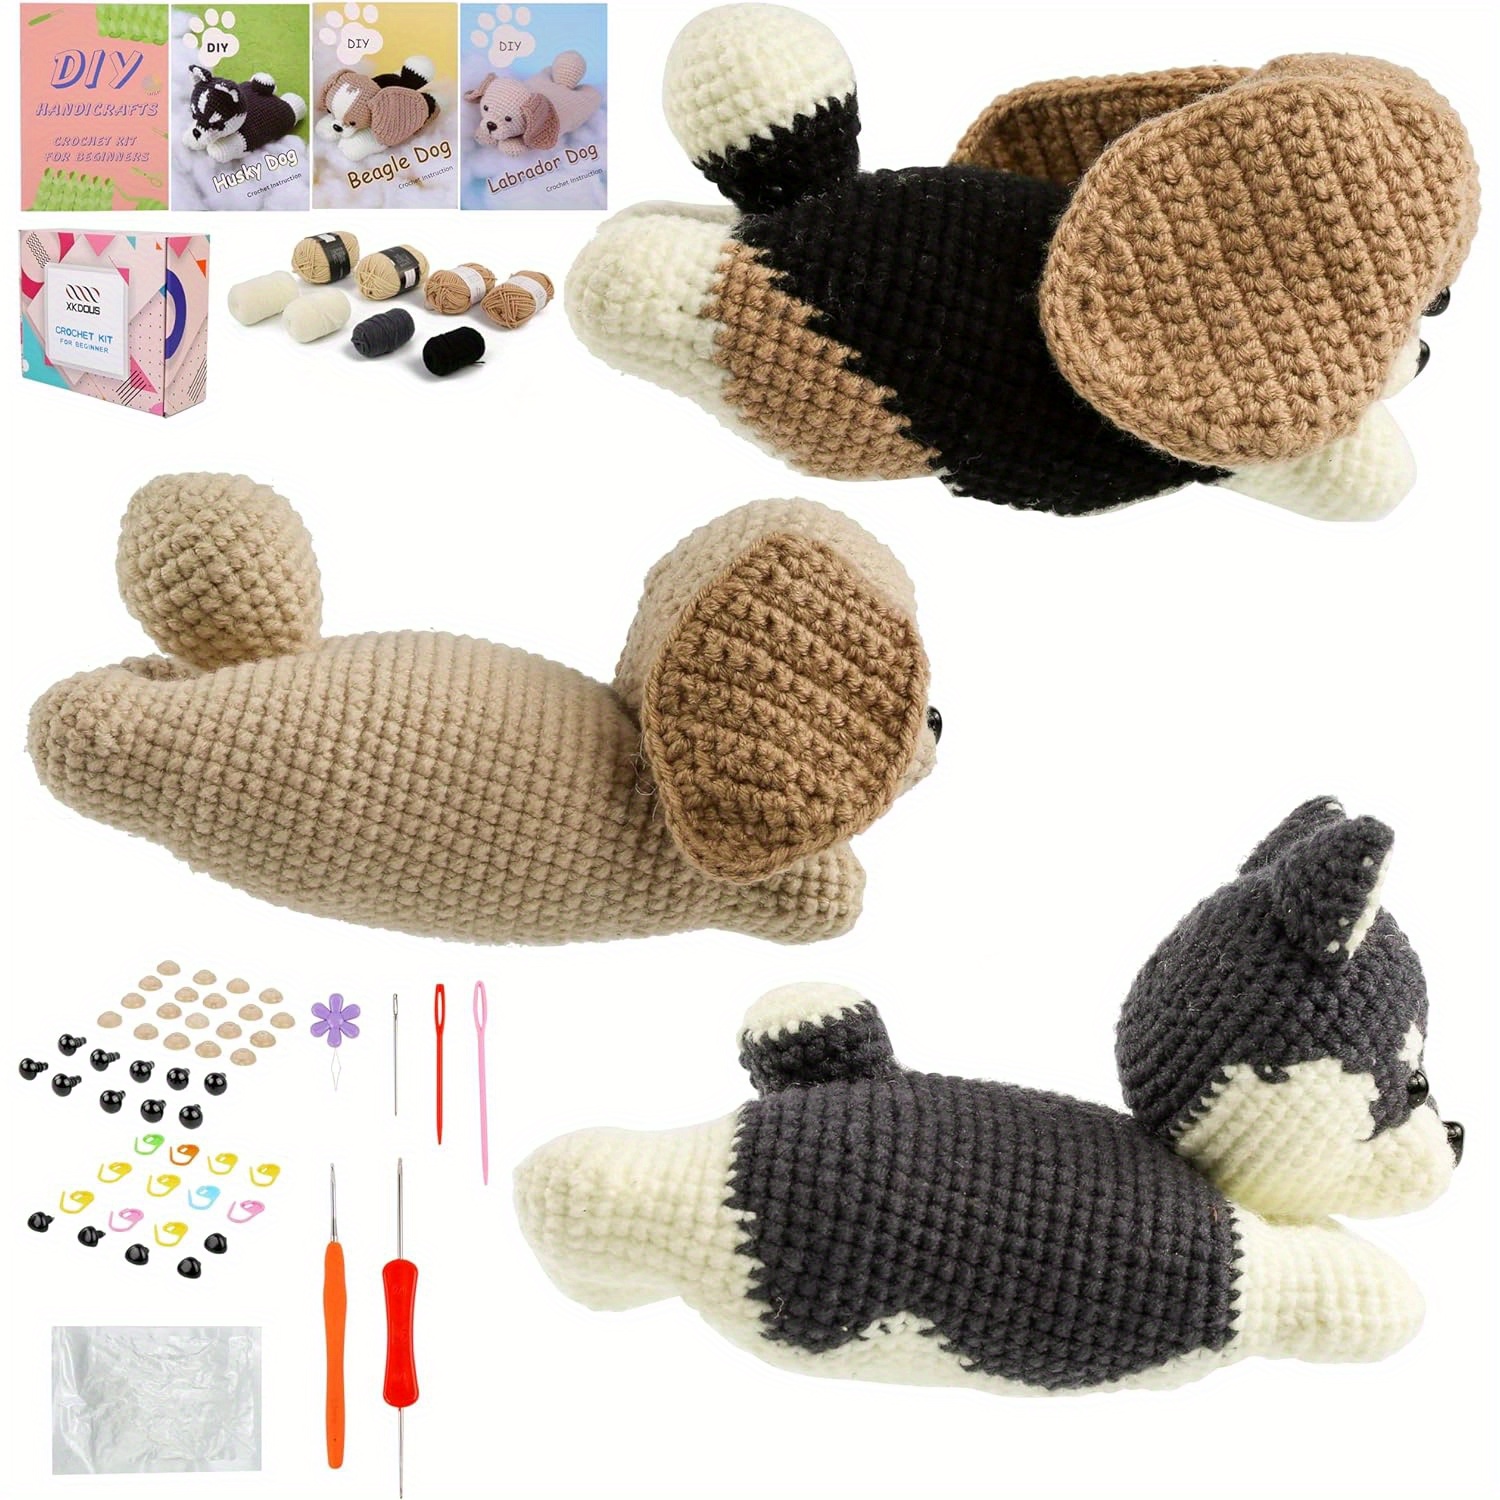 

Crochet Kit For Beginners With Detailed Illustrated Guide And Step-by-step Video Tutorial - Adult Learning Crochet Animal Kit (3 Dogs)